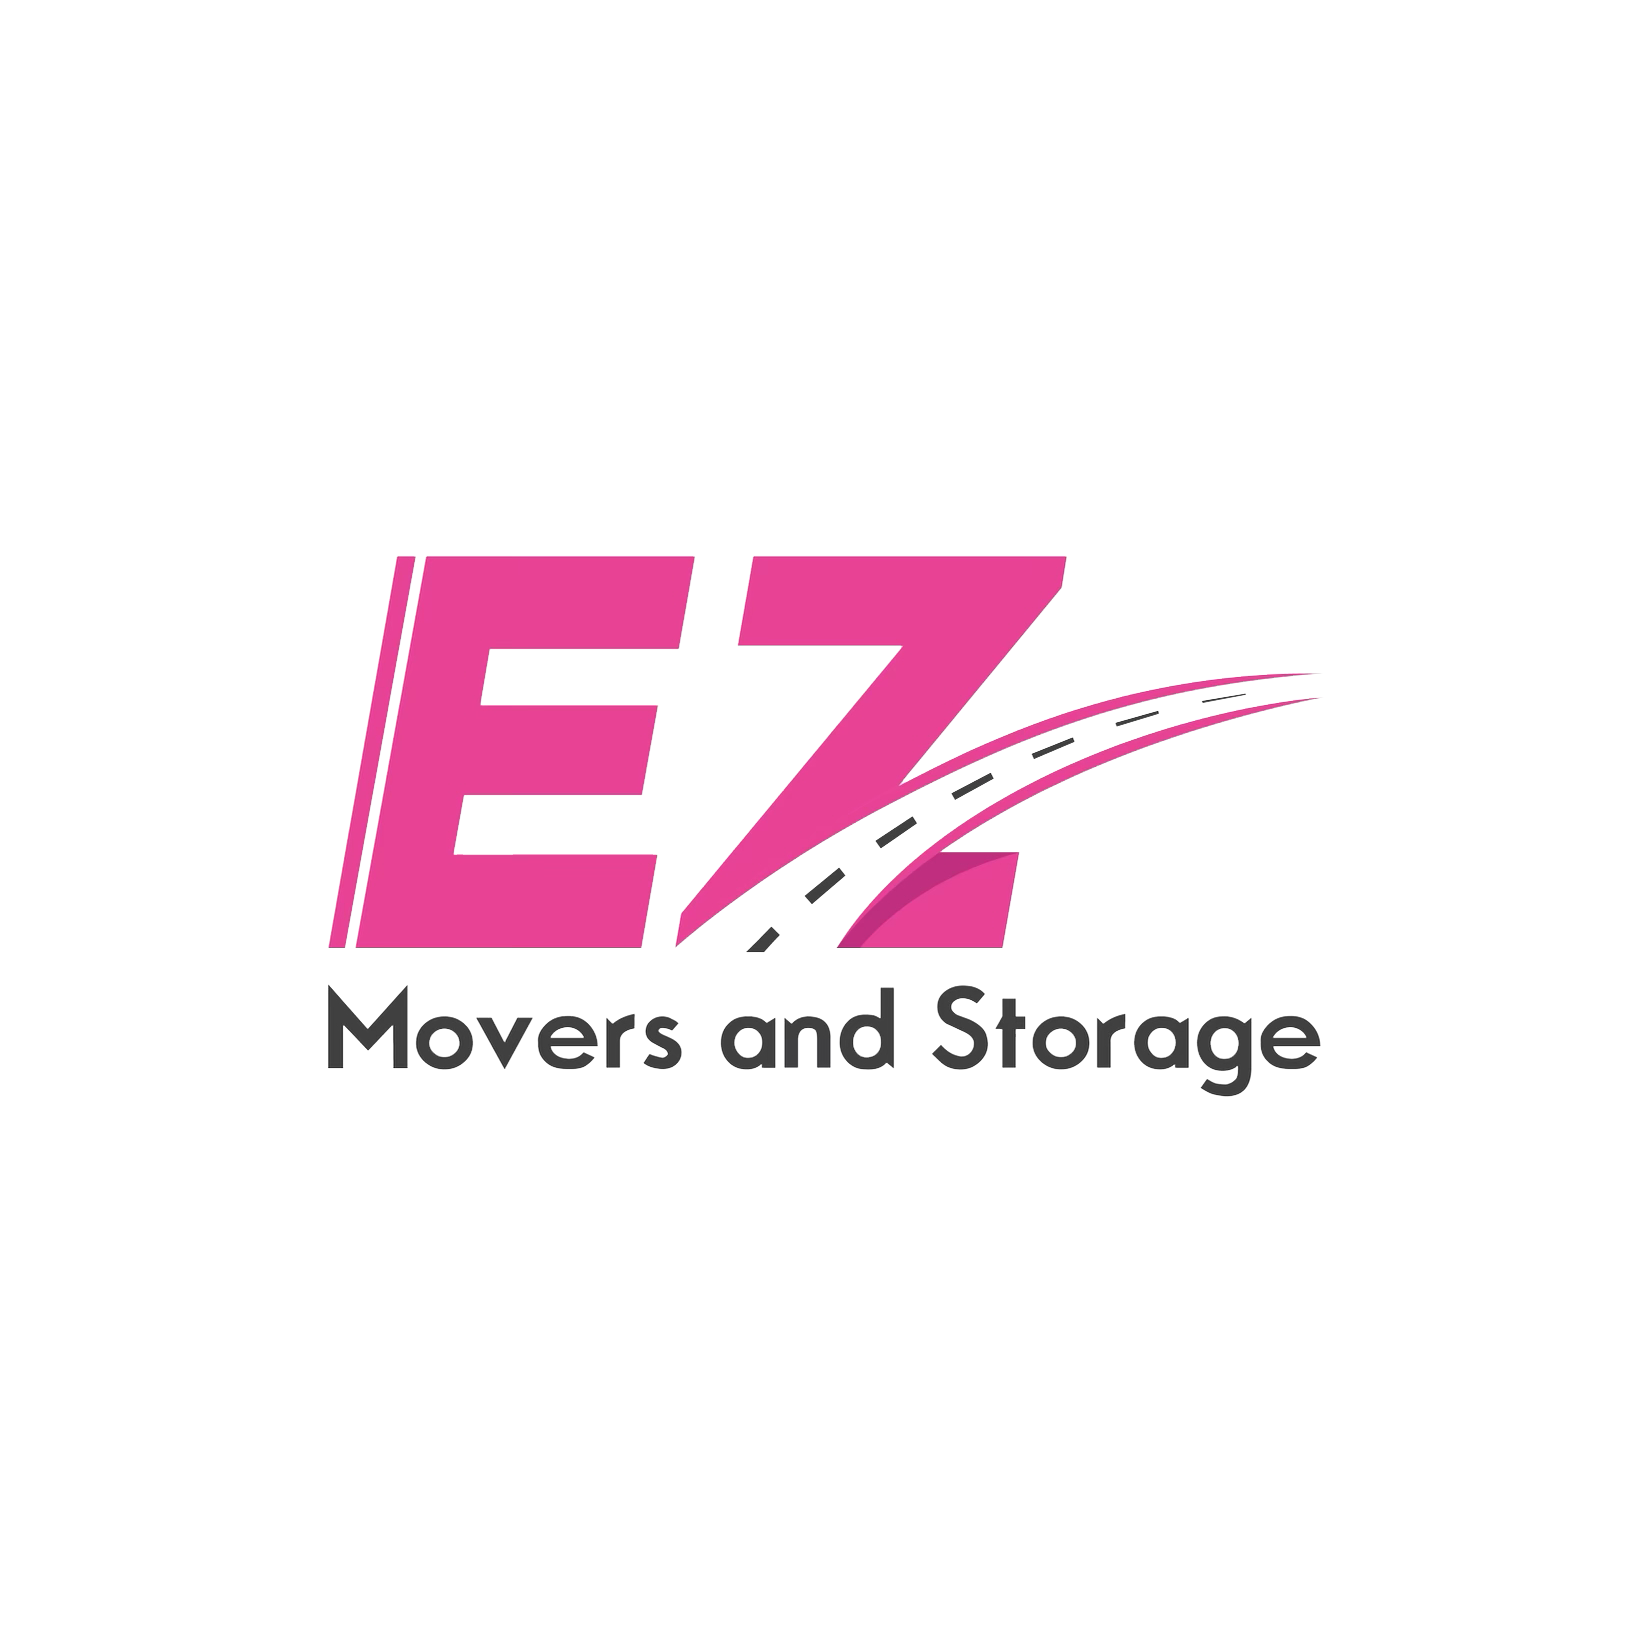 EZ Movers and Storage - Chicago, IL 60642 - (888)917-8300 | ShowMeLocal.com